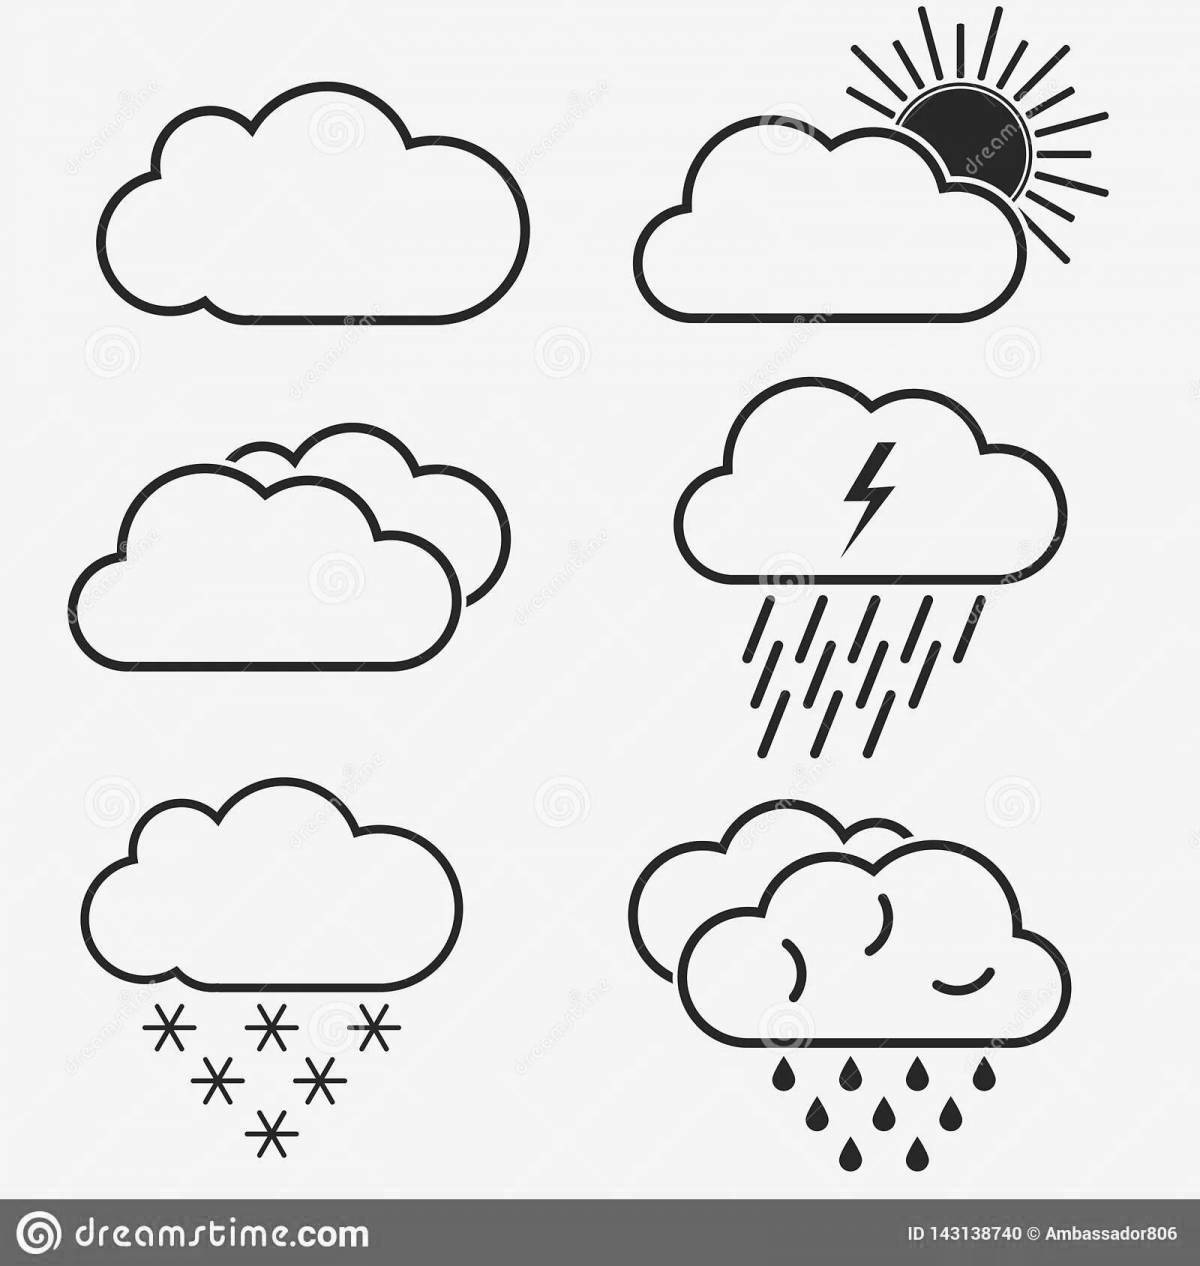 Weather coloring book